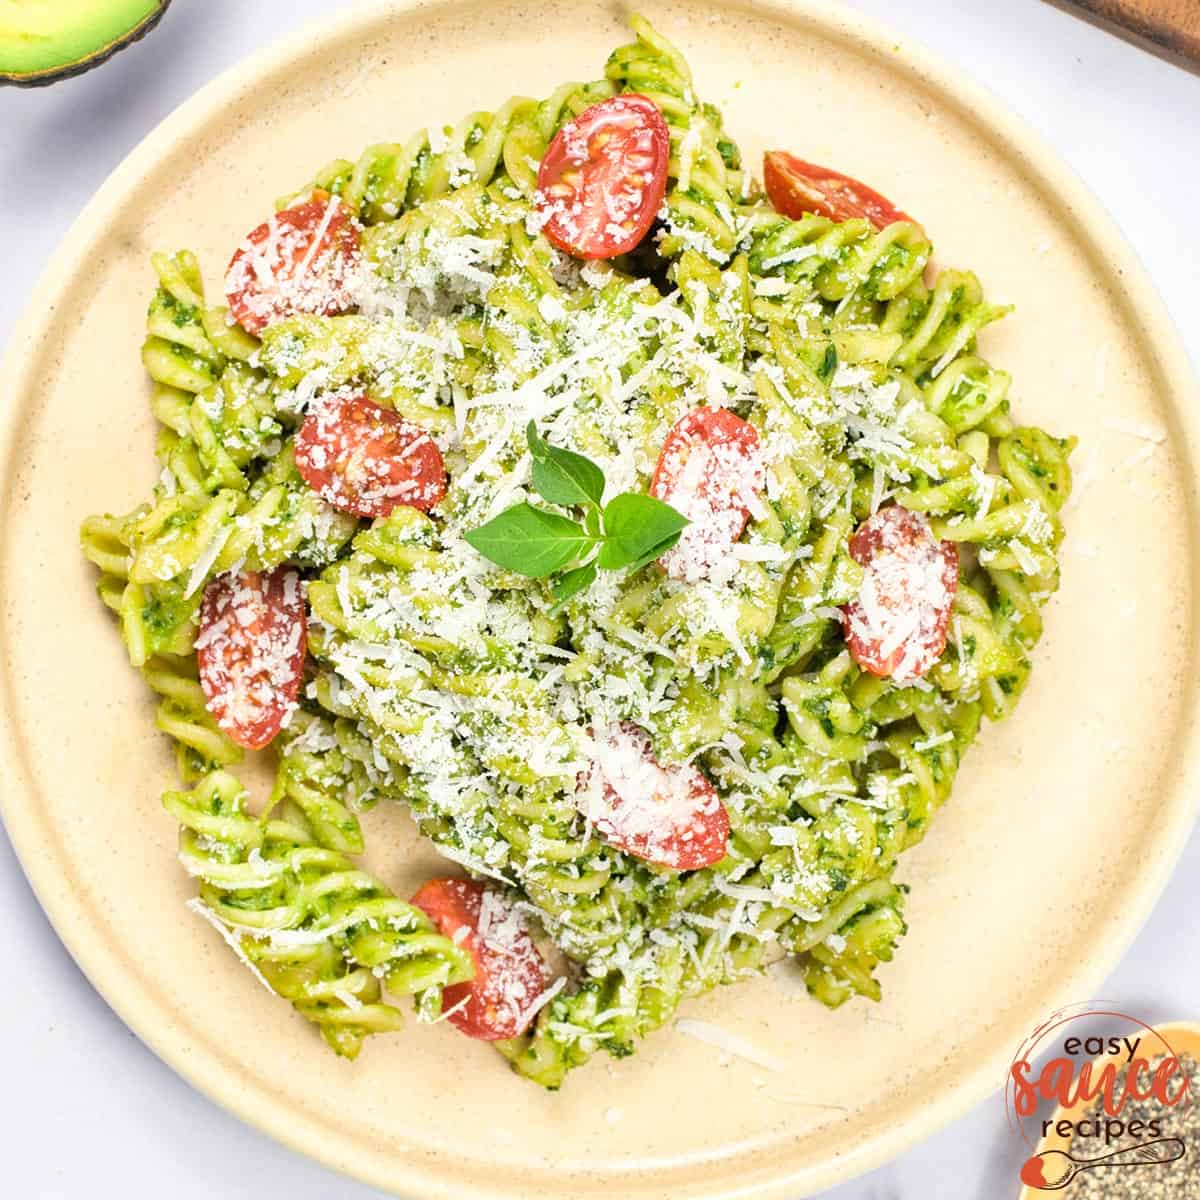 a plate full of avocado sauce pasta with cheese and tomato garnish